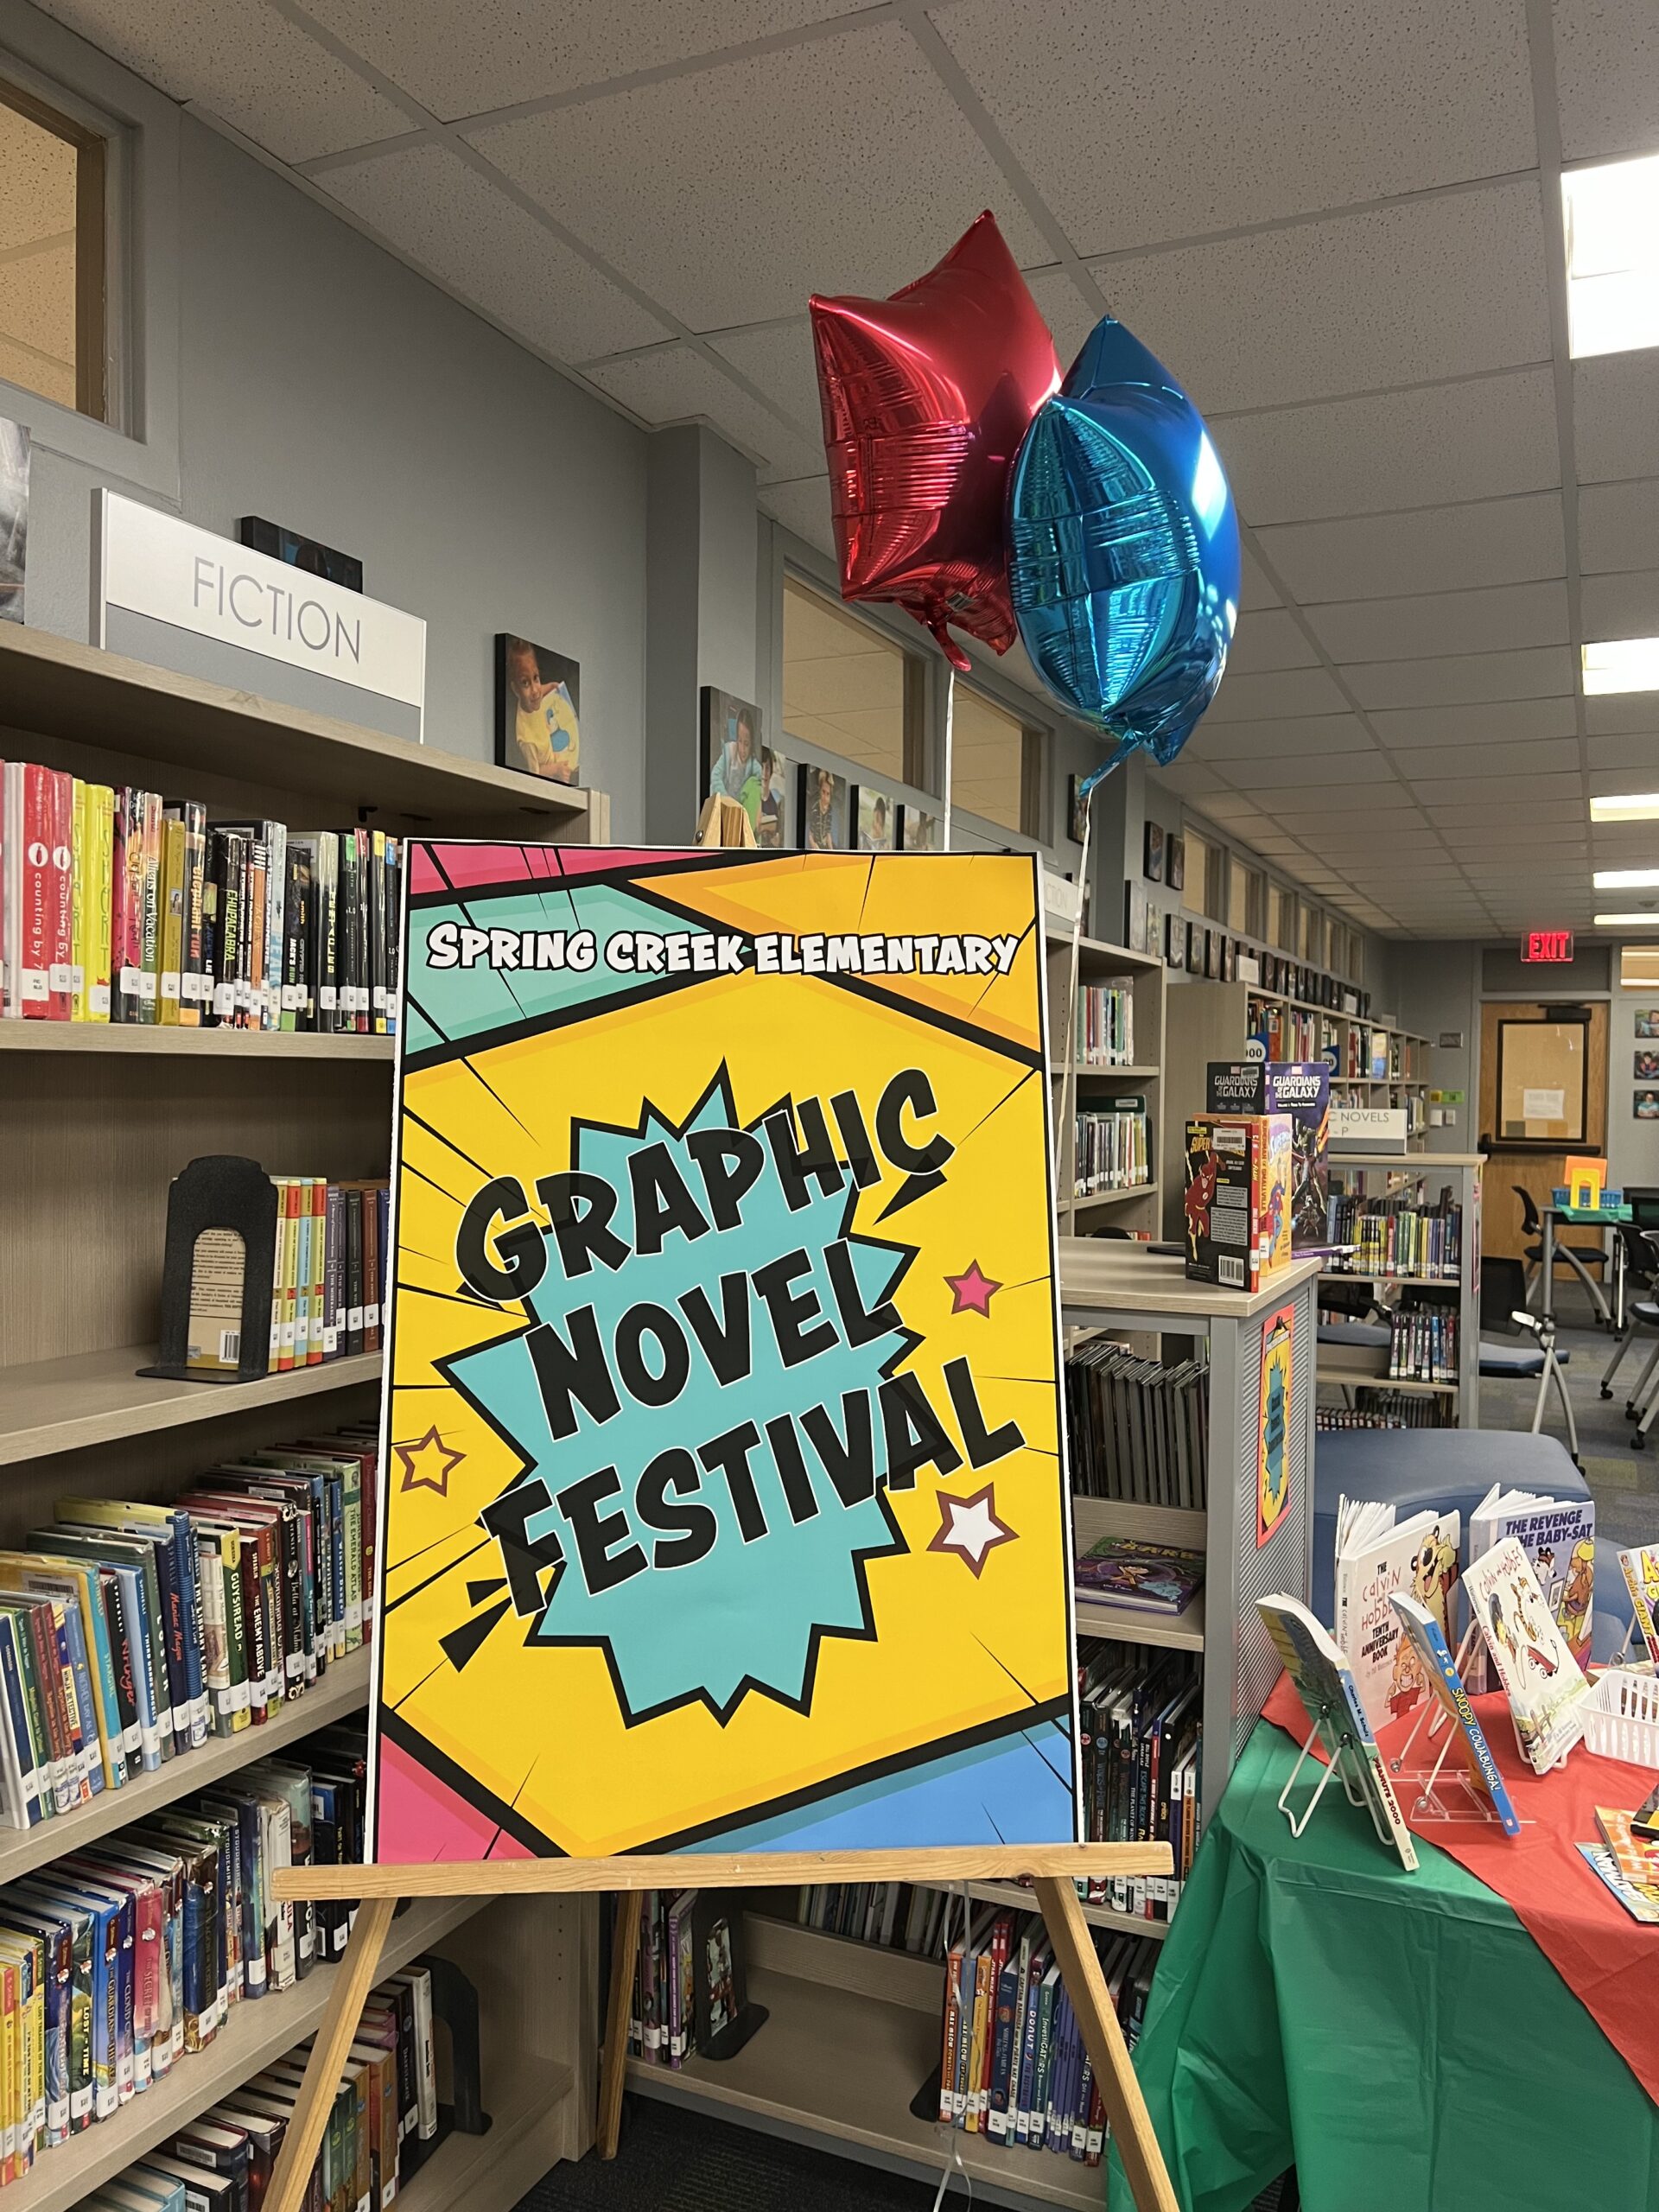 Graphic Novel Festival poster in school library